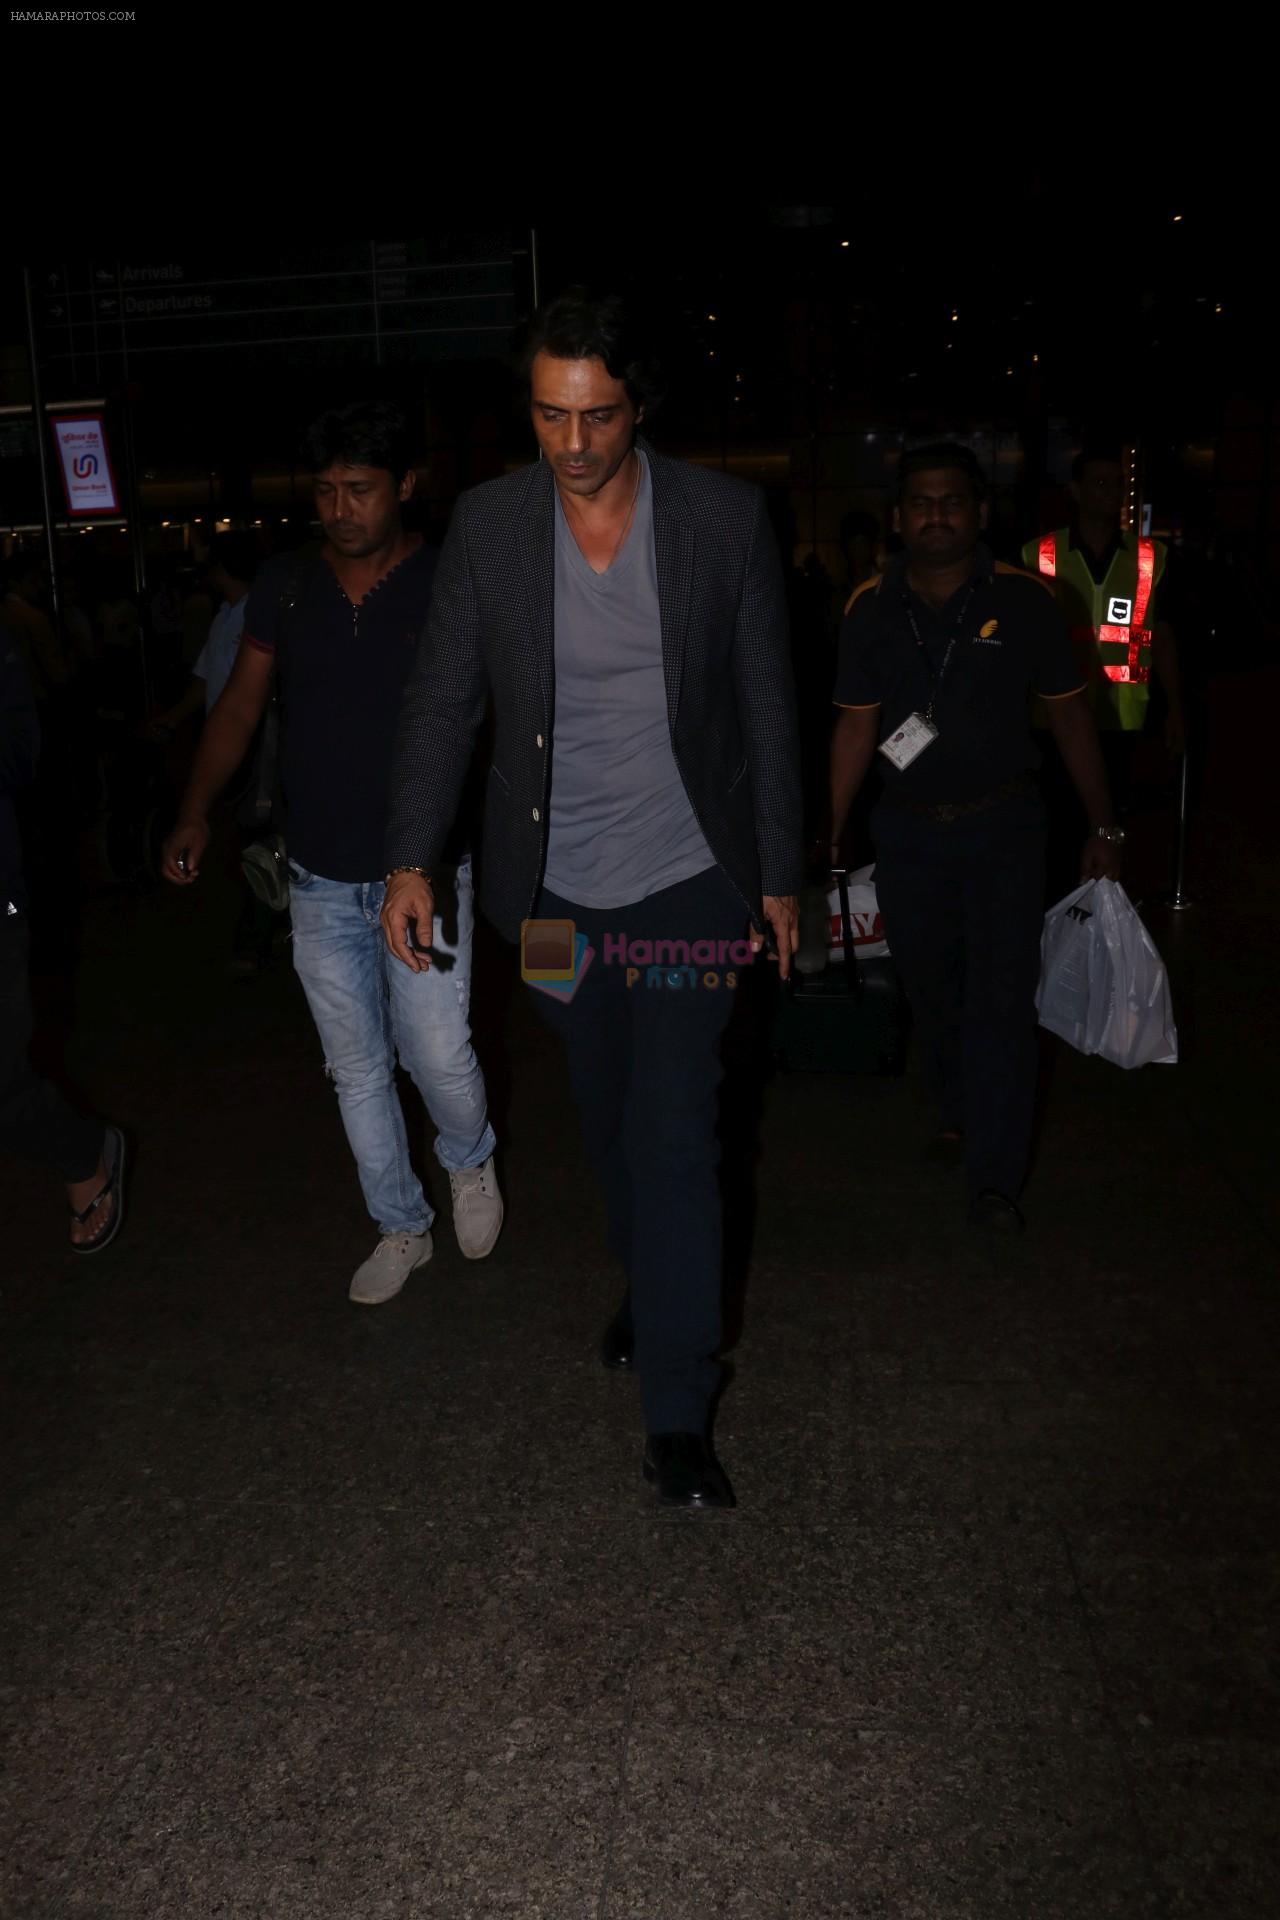 Arjun Rampal Spotted At Airport on 23rd Sept 2017